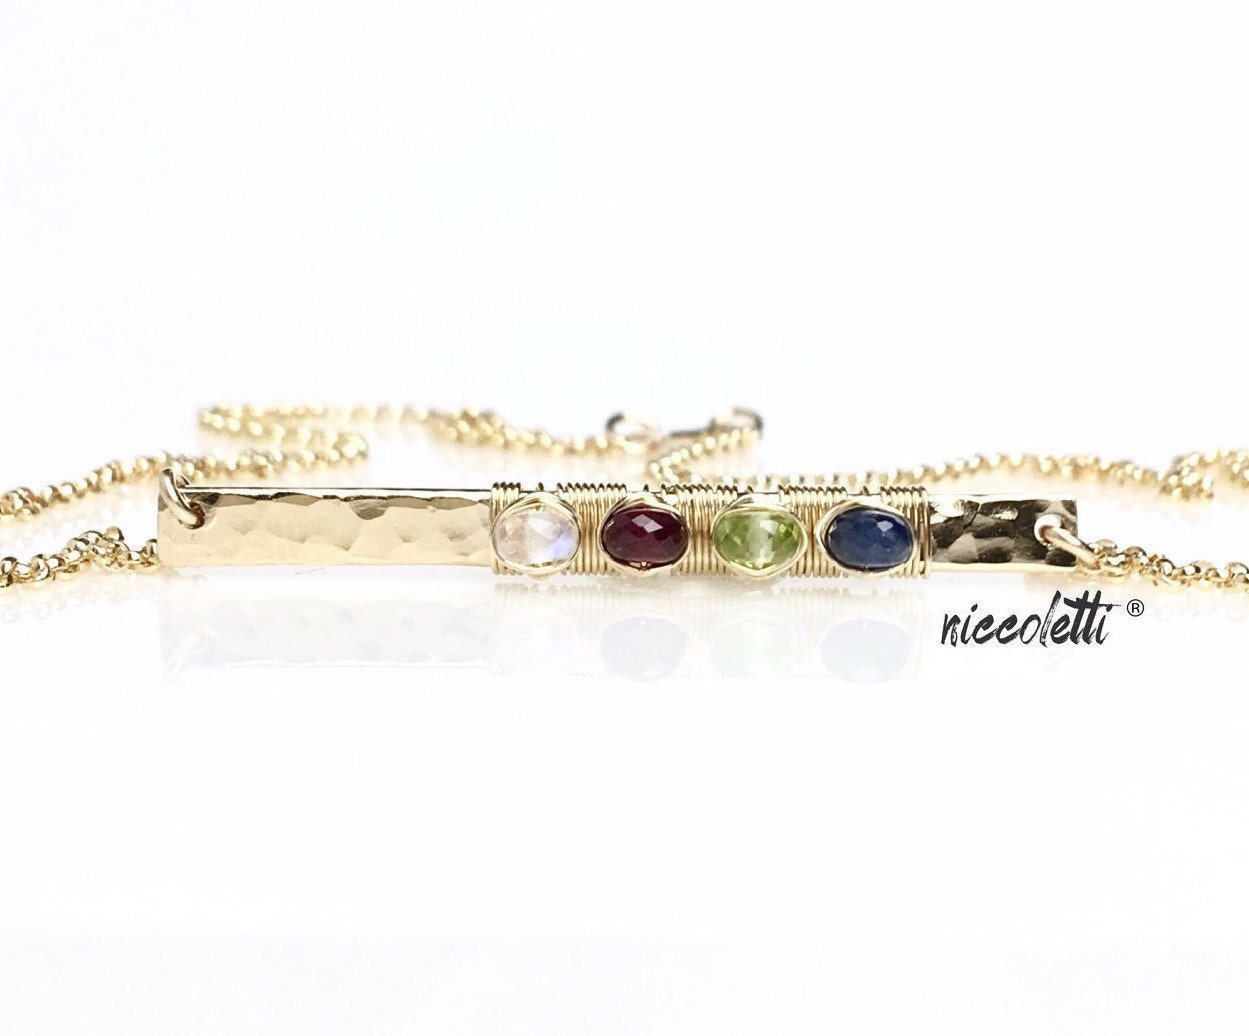 Custom Birthstone Bar Necklace / 14K Gold Bar Necklace / Gift for Her / New Mom Gift / Mother's Day Gift / Silver Birthstone Necklace